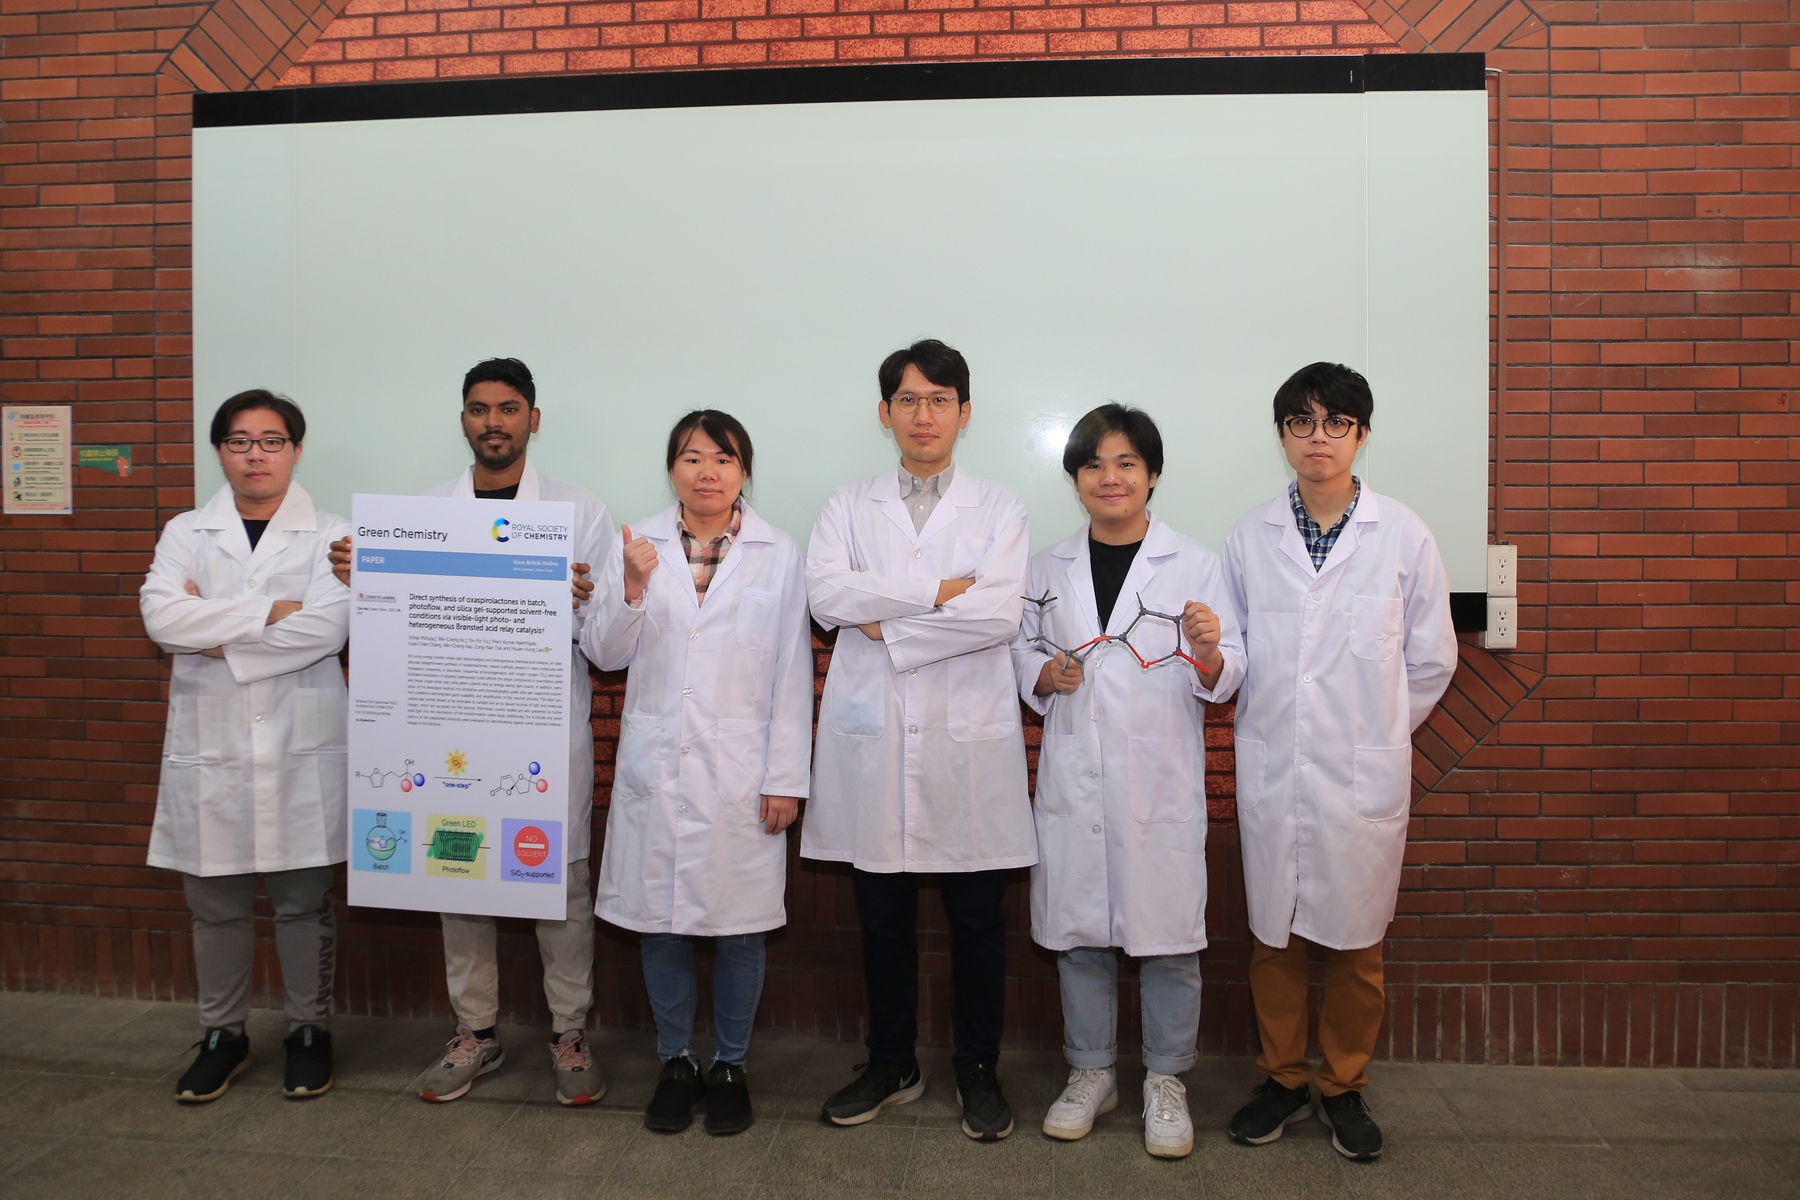 Hsuan-Hung Liao, an assistant professor of the Department of Chemistry at NSYSU (fourth from the left) indicated that this technique was performed under sufficient sunlight conditions in Kaohsiung. In gloomy weather where sunlight is insufficient, LED light strips or household fluorescent light bars can be used instead for the synthesis. These light sources are commonly used at home, in offices and laboratories, and even as light decorations during the Christmas season. The synthesis can be finished within 12 hours.